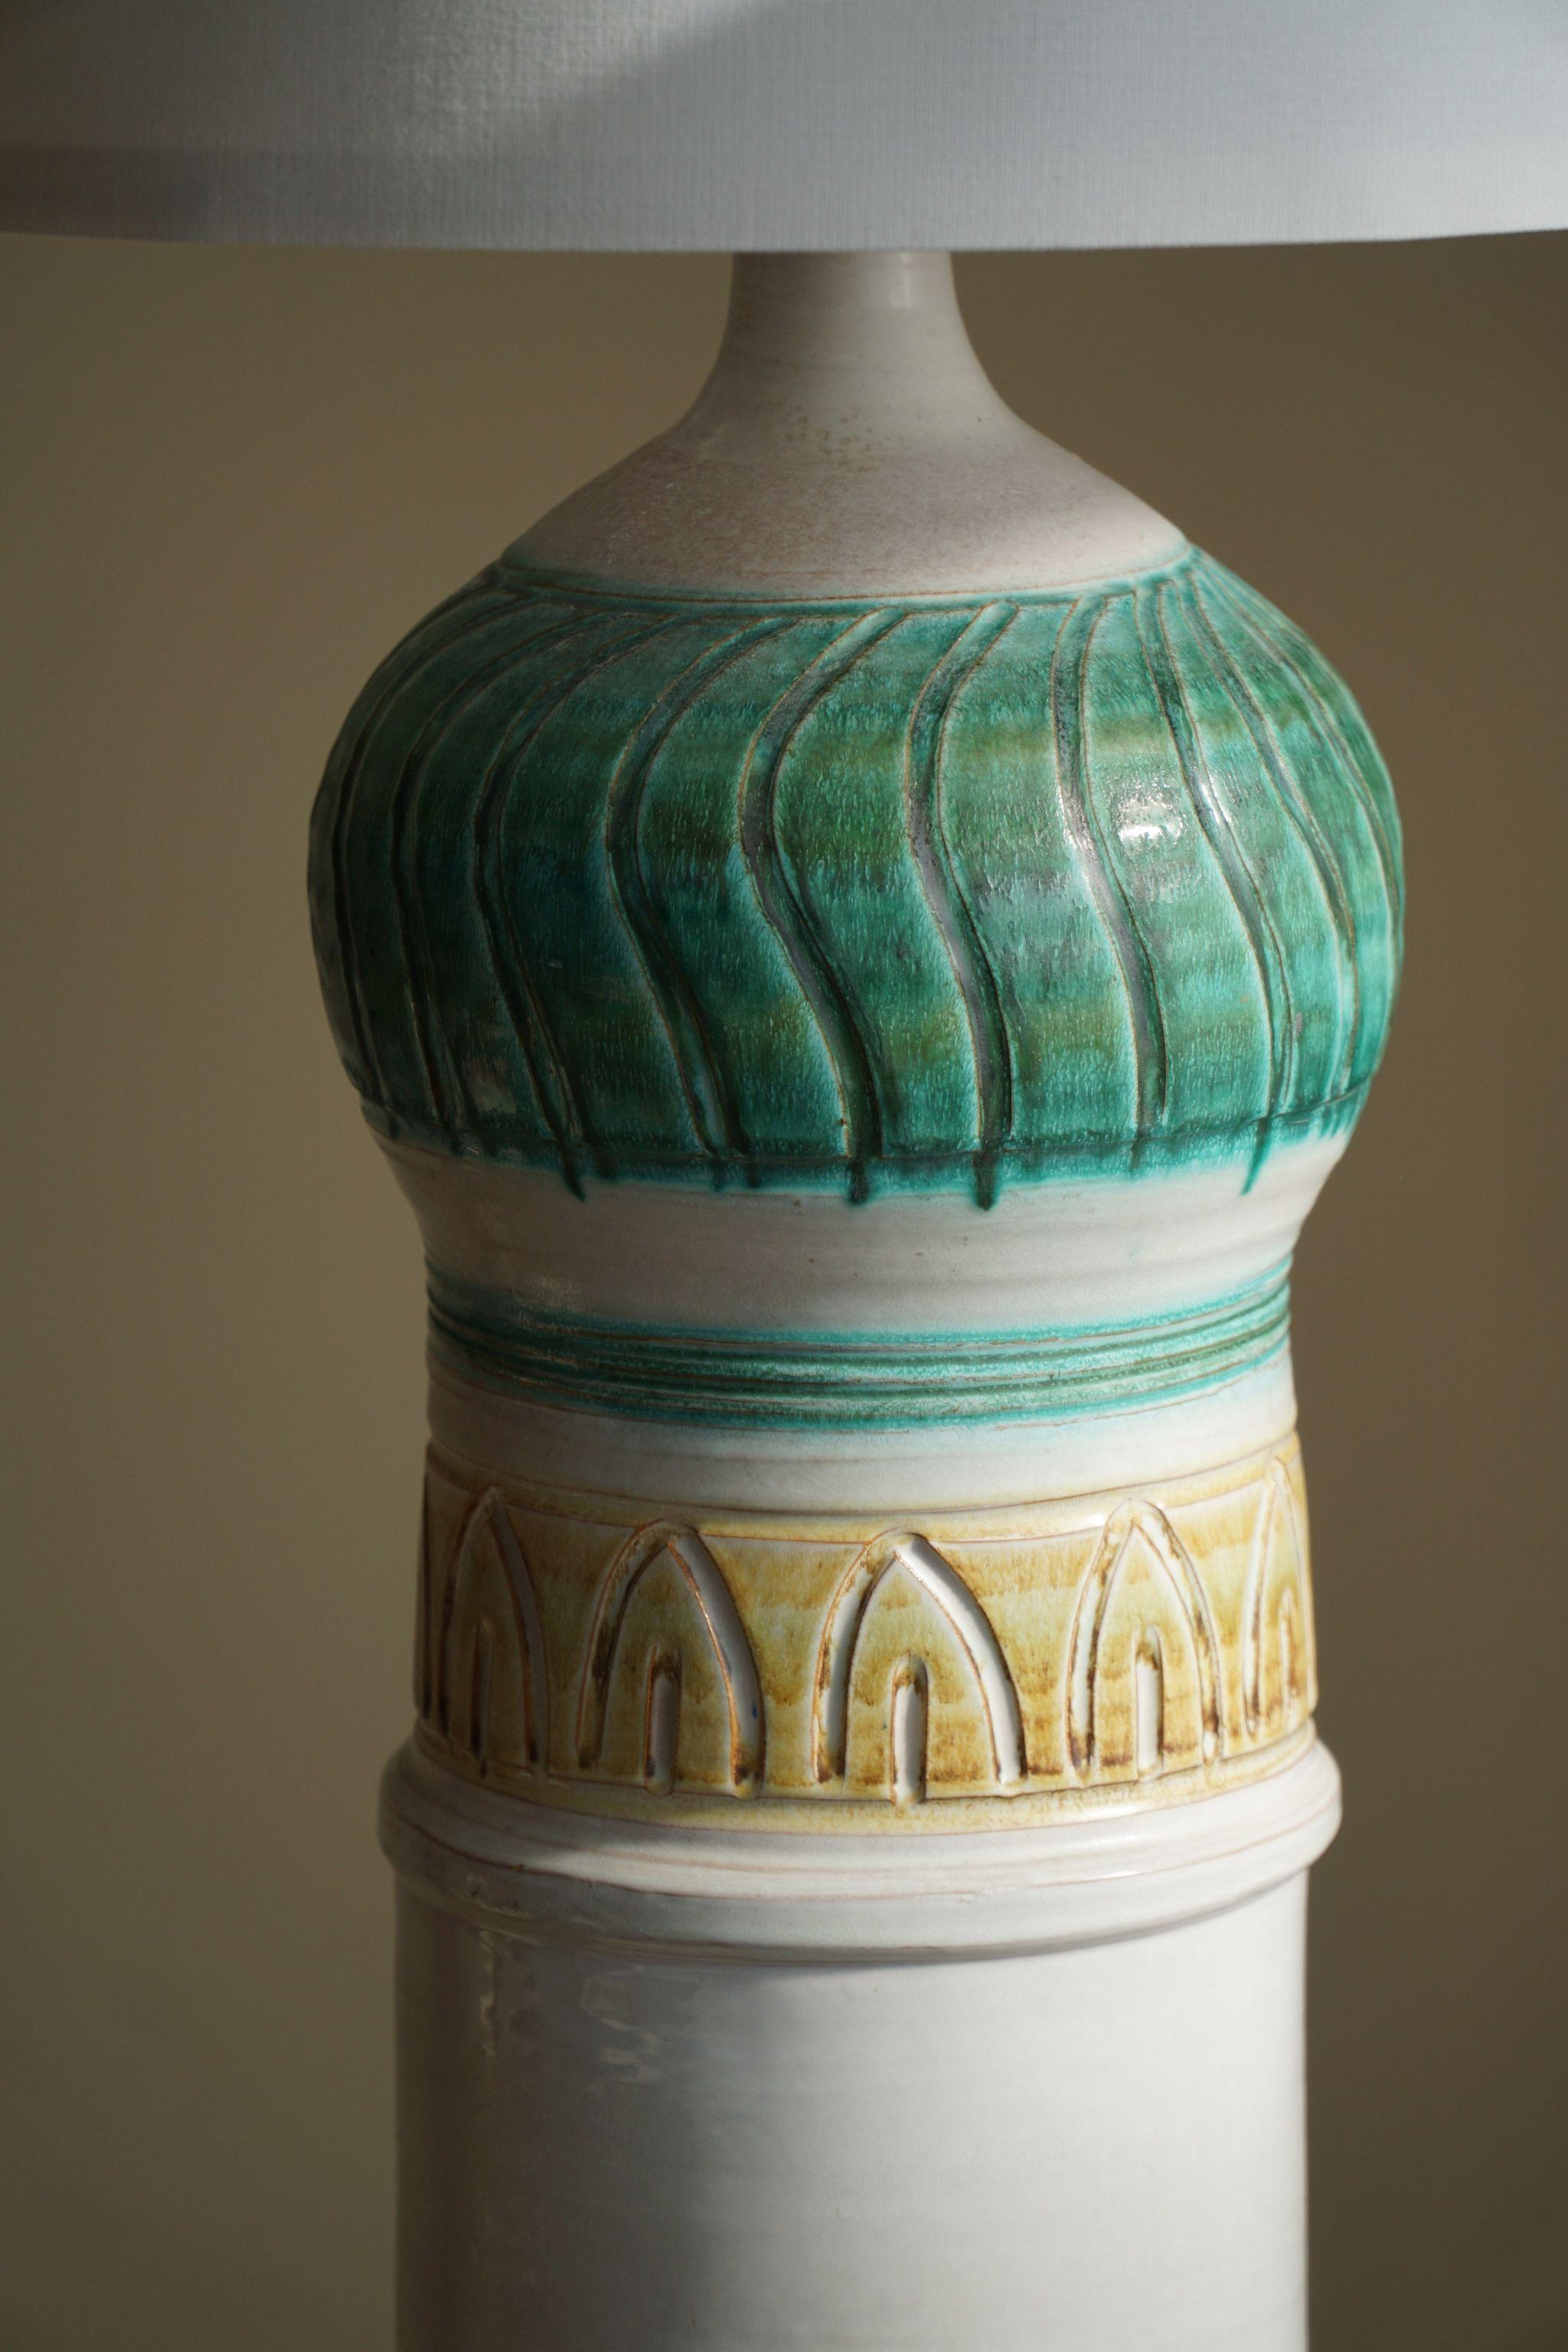 Danish Modern Decorative Ceramic Floor Lamp, Made in 1970s In Good Condition For Sale In Odense, DK